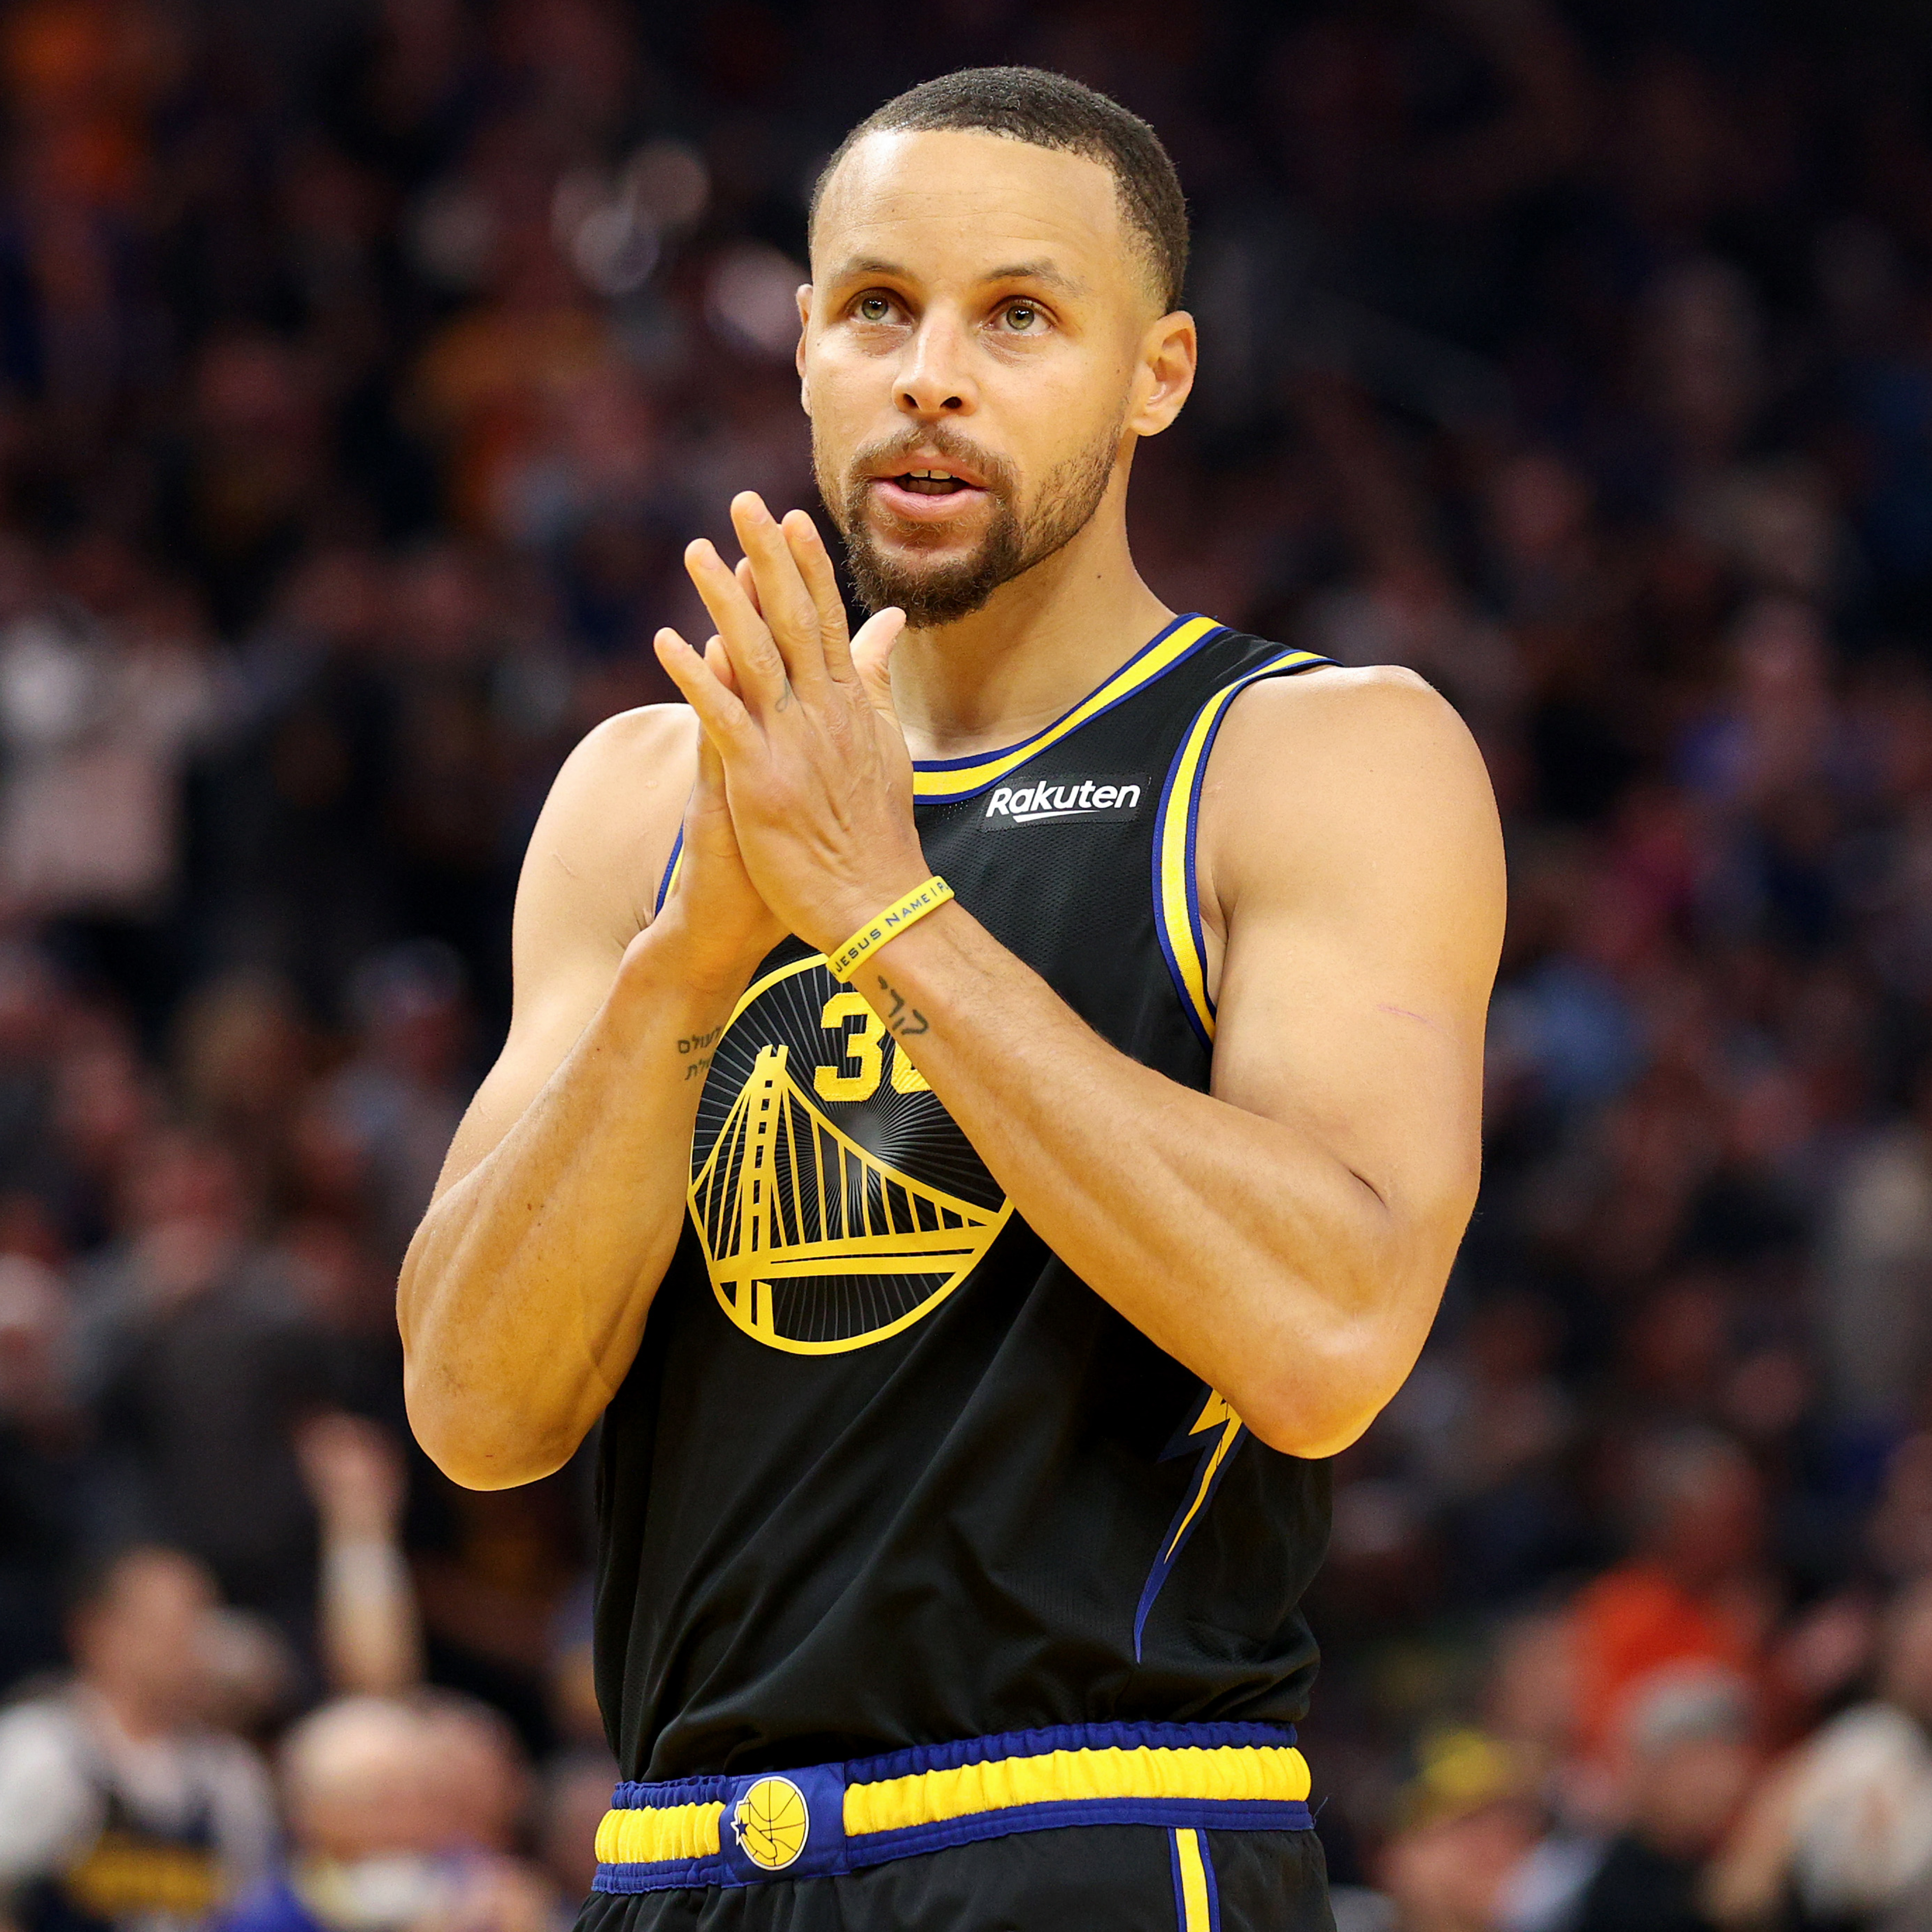 Warriors’ Steph Curry Suffered Leg Injury vs. Celtics: ‘Don’t Think I’ll Miss a Game’